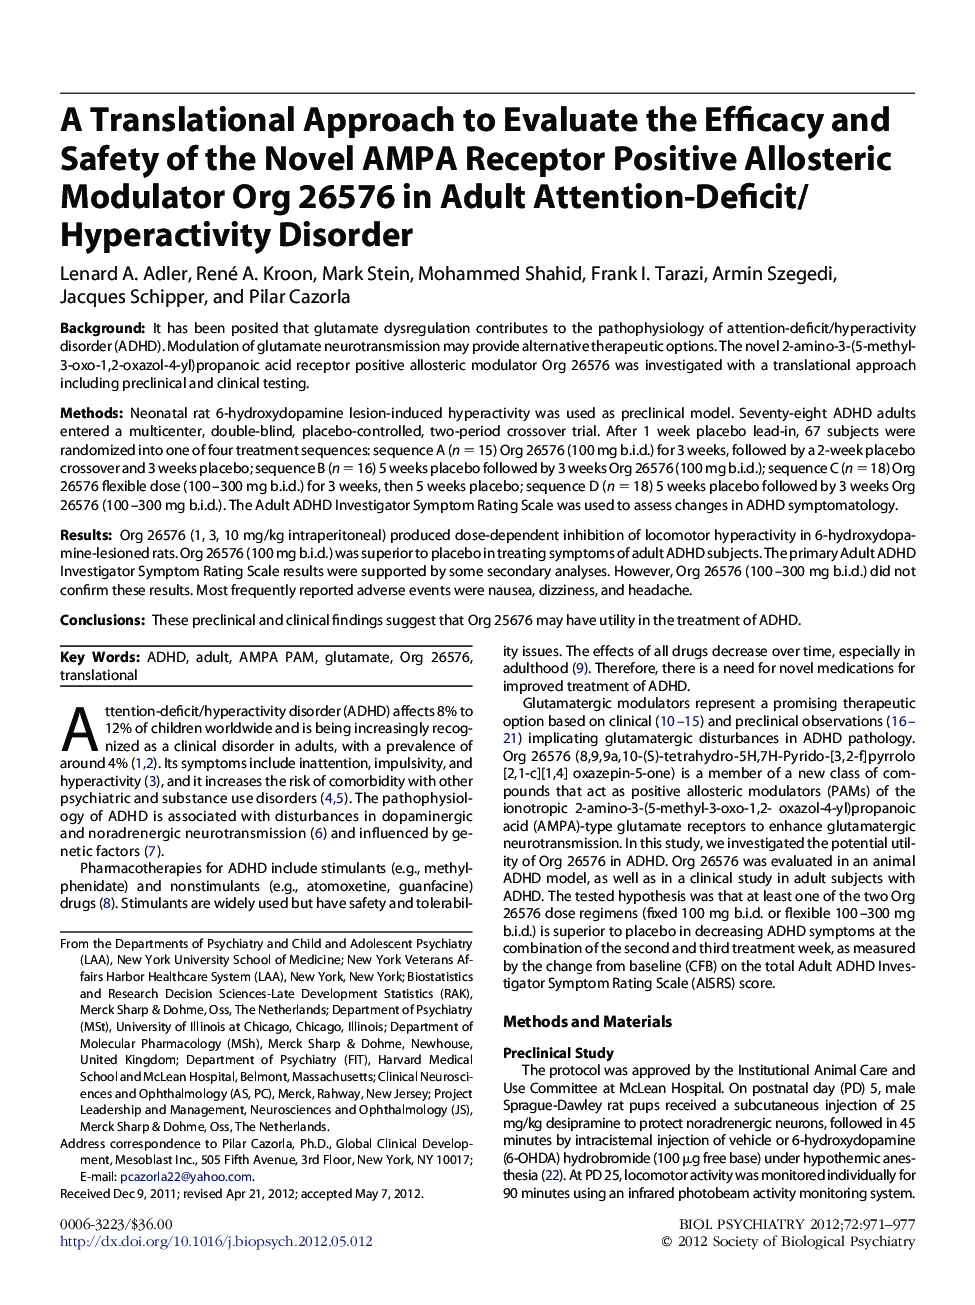 A Translational Approach to Evaluate the Efficacy and Safety of the Novel AMPA Receptor Positive Allosteric Modulator Org 26576 in Adult Attention-Deficit/Hyperactivity Disorder